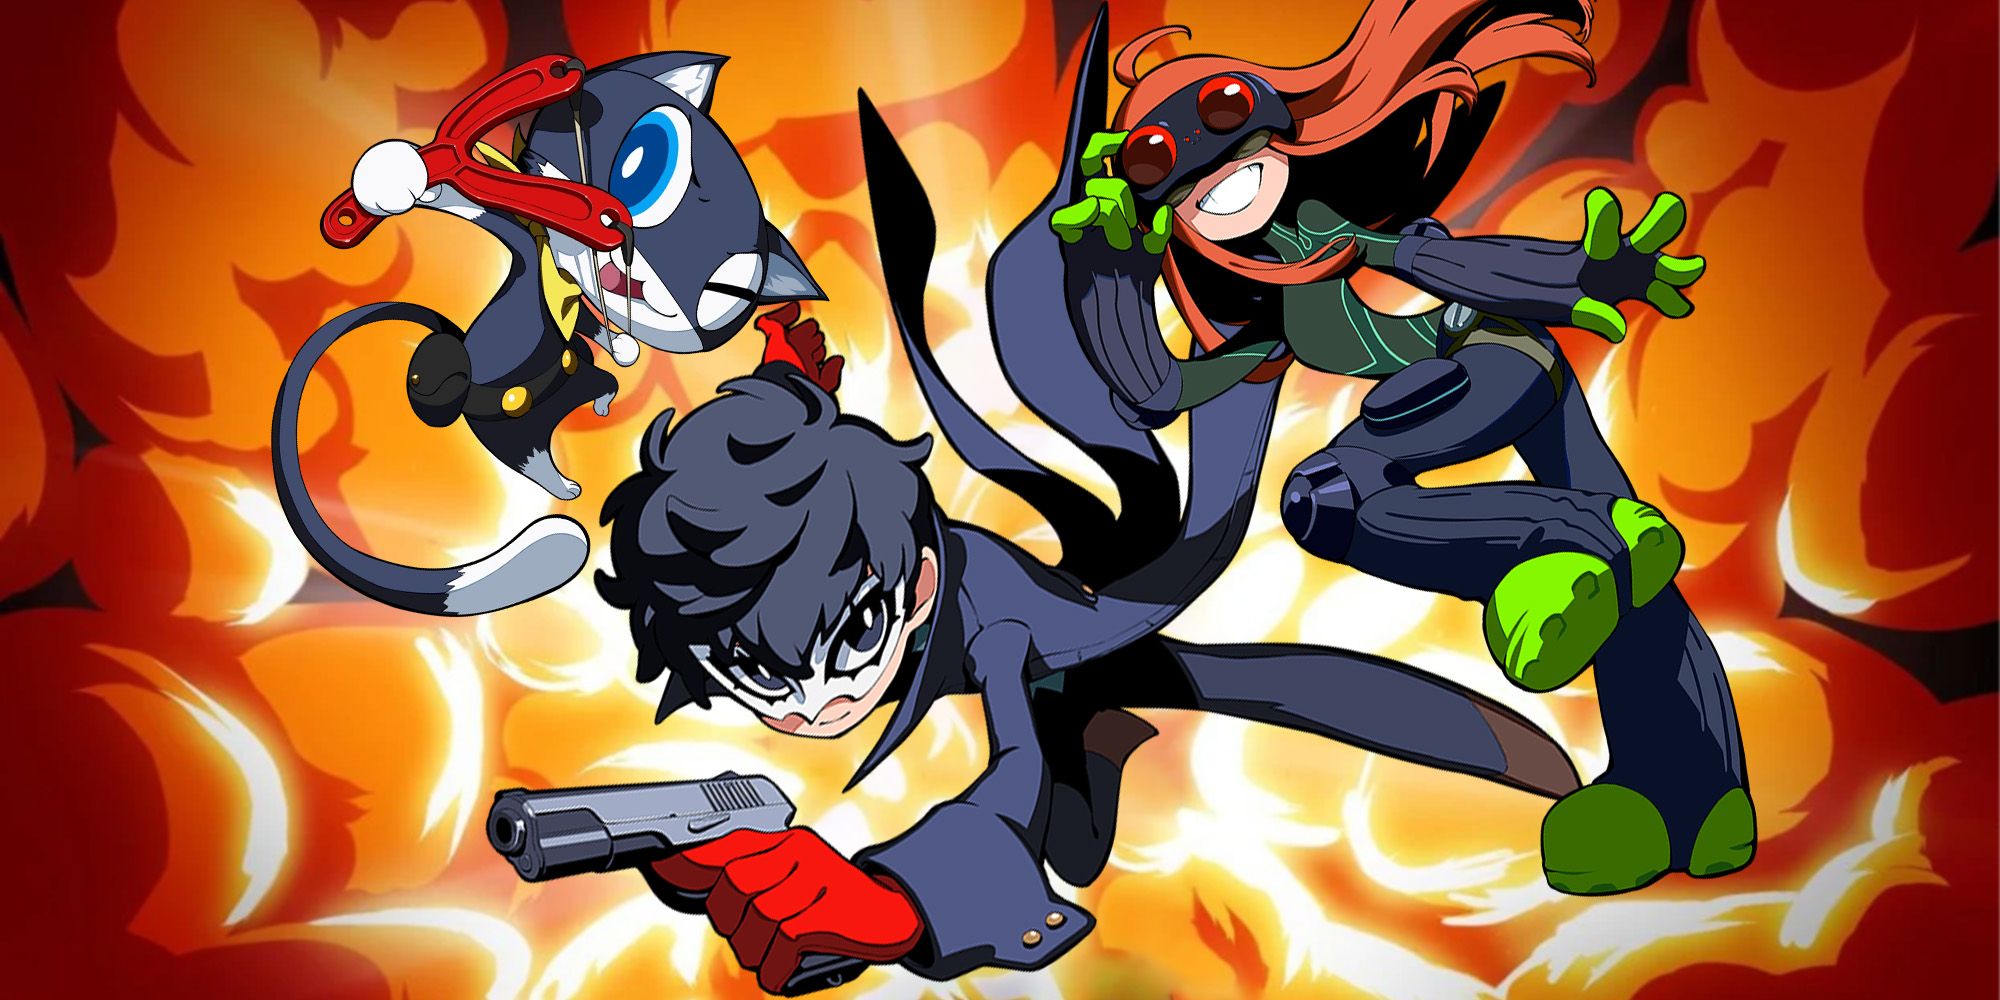 All Persona 5 Tactica Playable Characters, Wiki, Gameplay and More - News